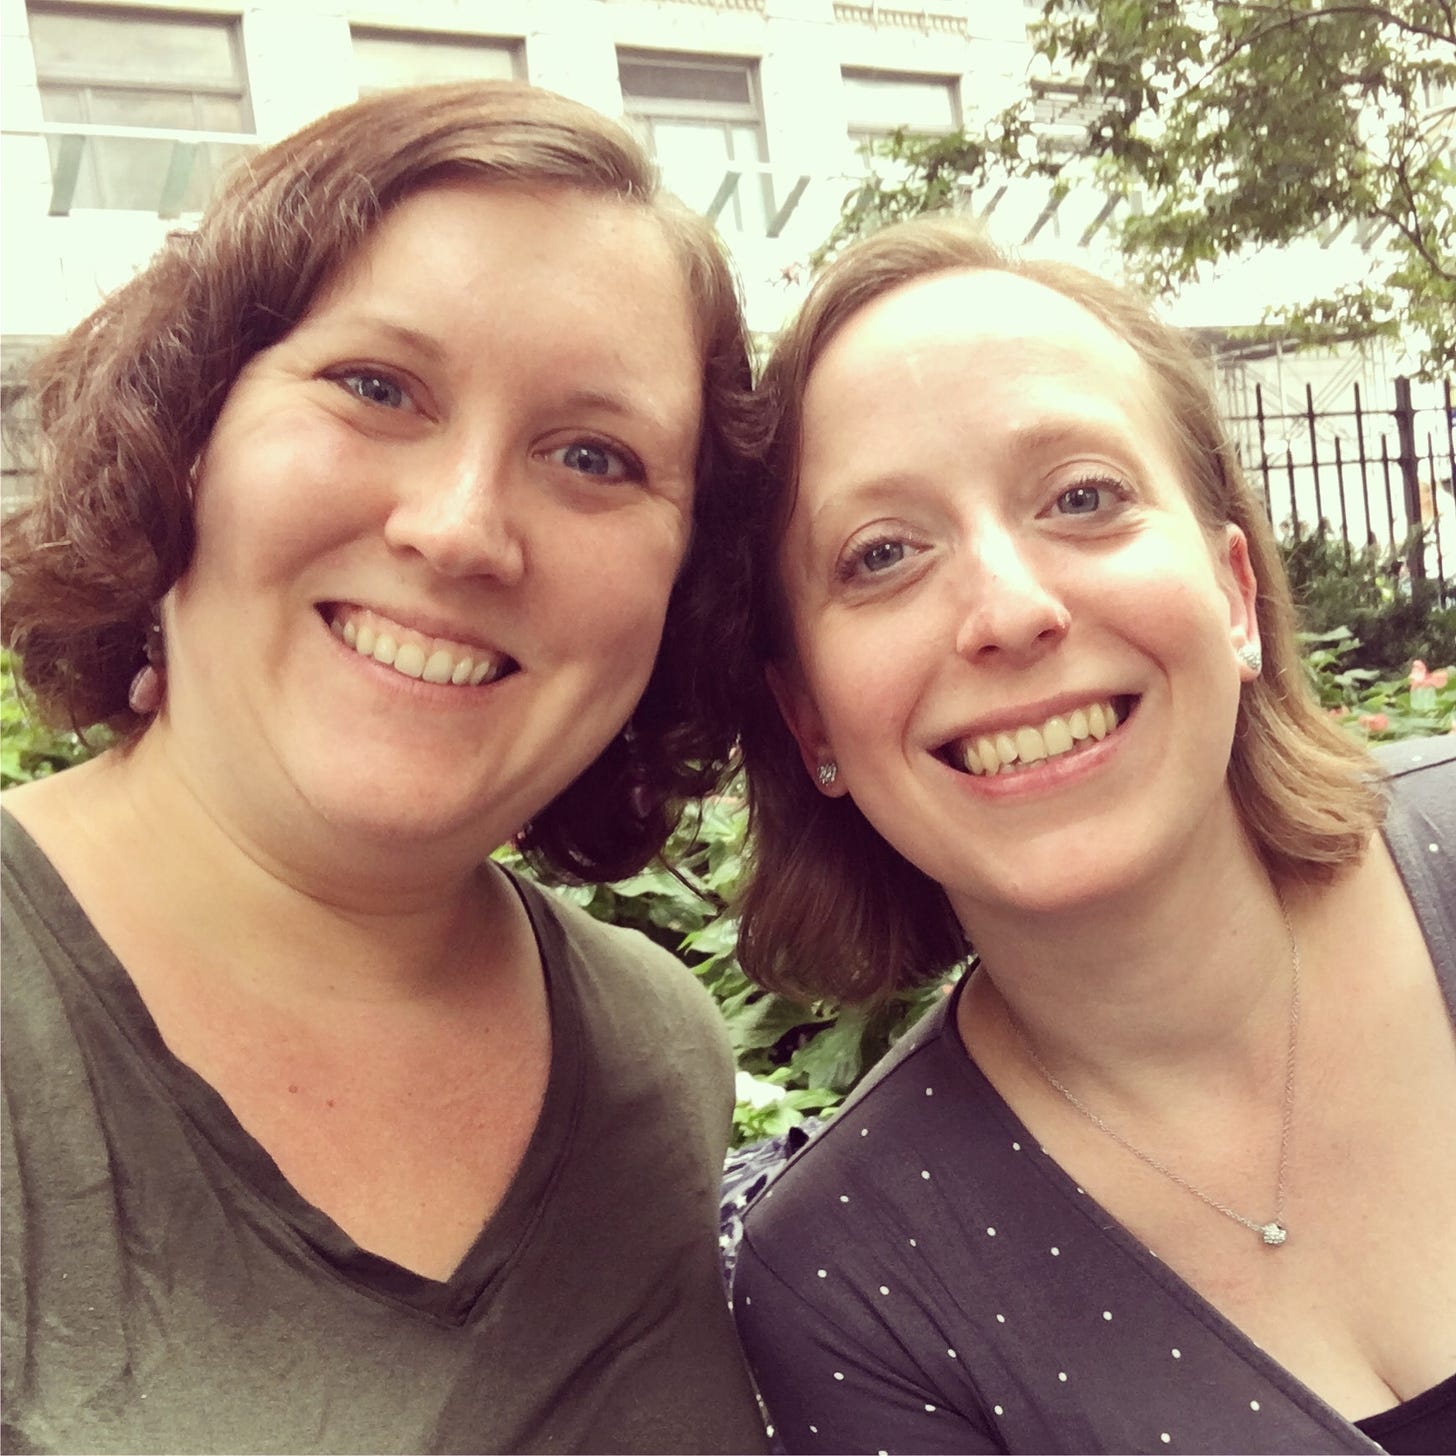 Kathryn Holmes and MarcyKate Connolly selfie in NYC